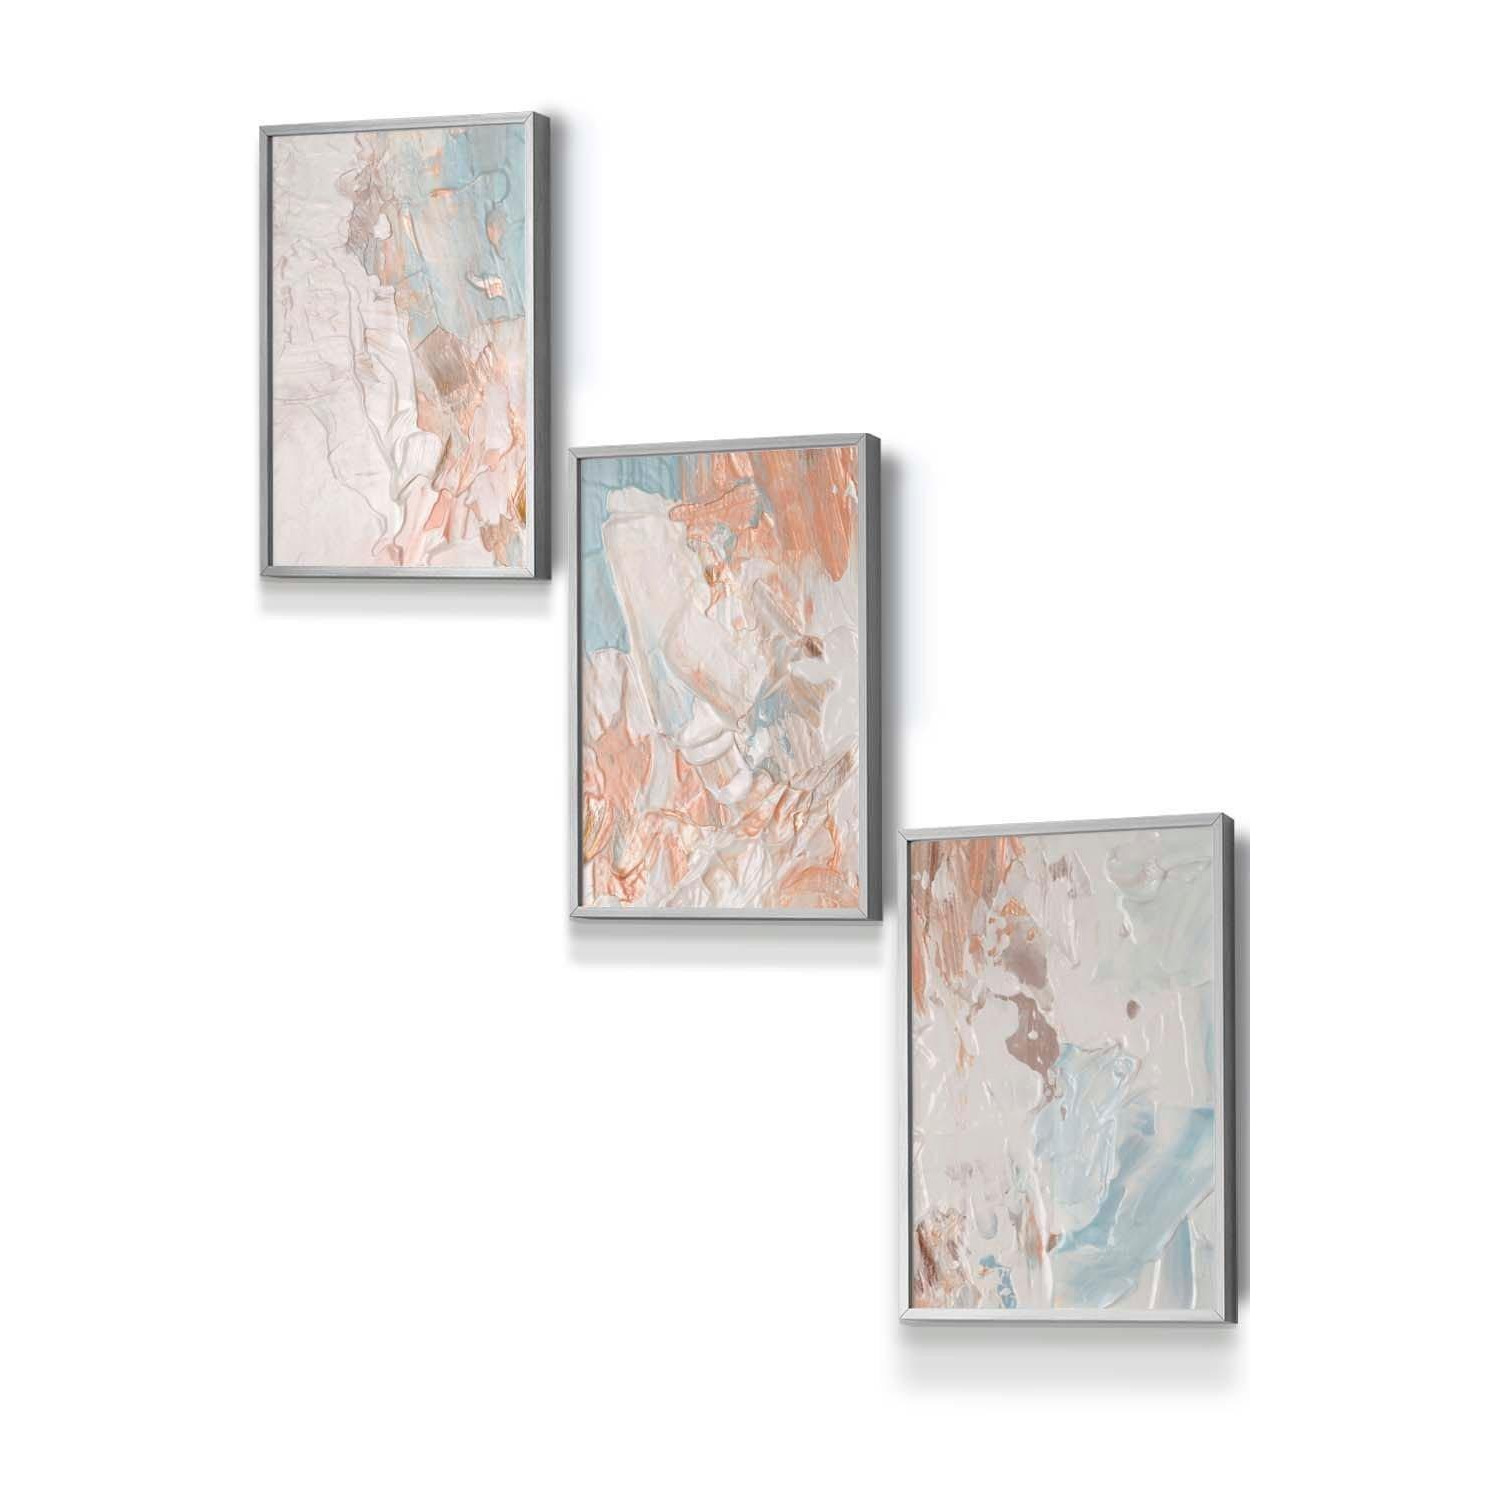 Set of 3 Light Grey Framed Abstract Oil in Pastel Blue Ivory and Peach Wall Art - image 1